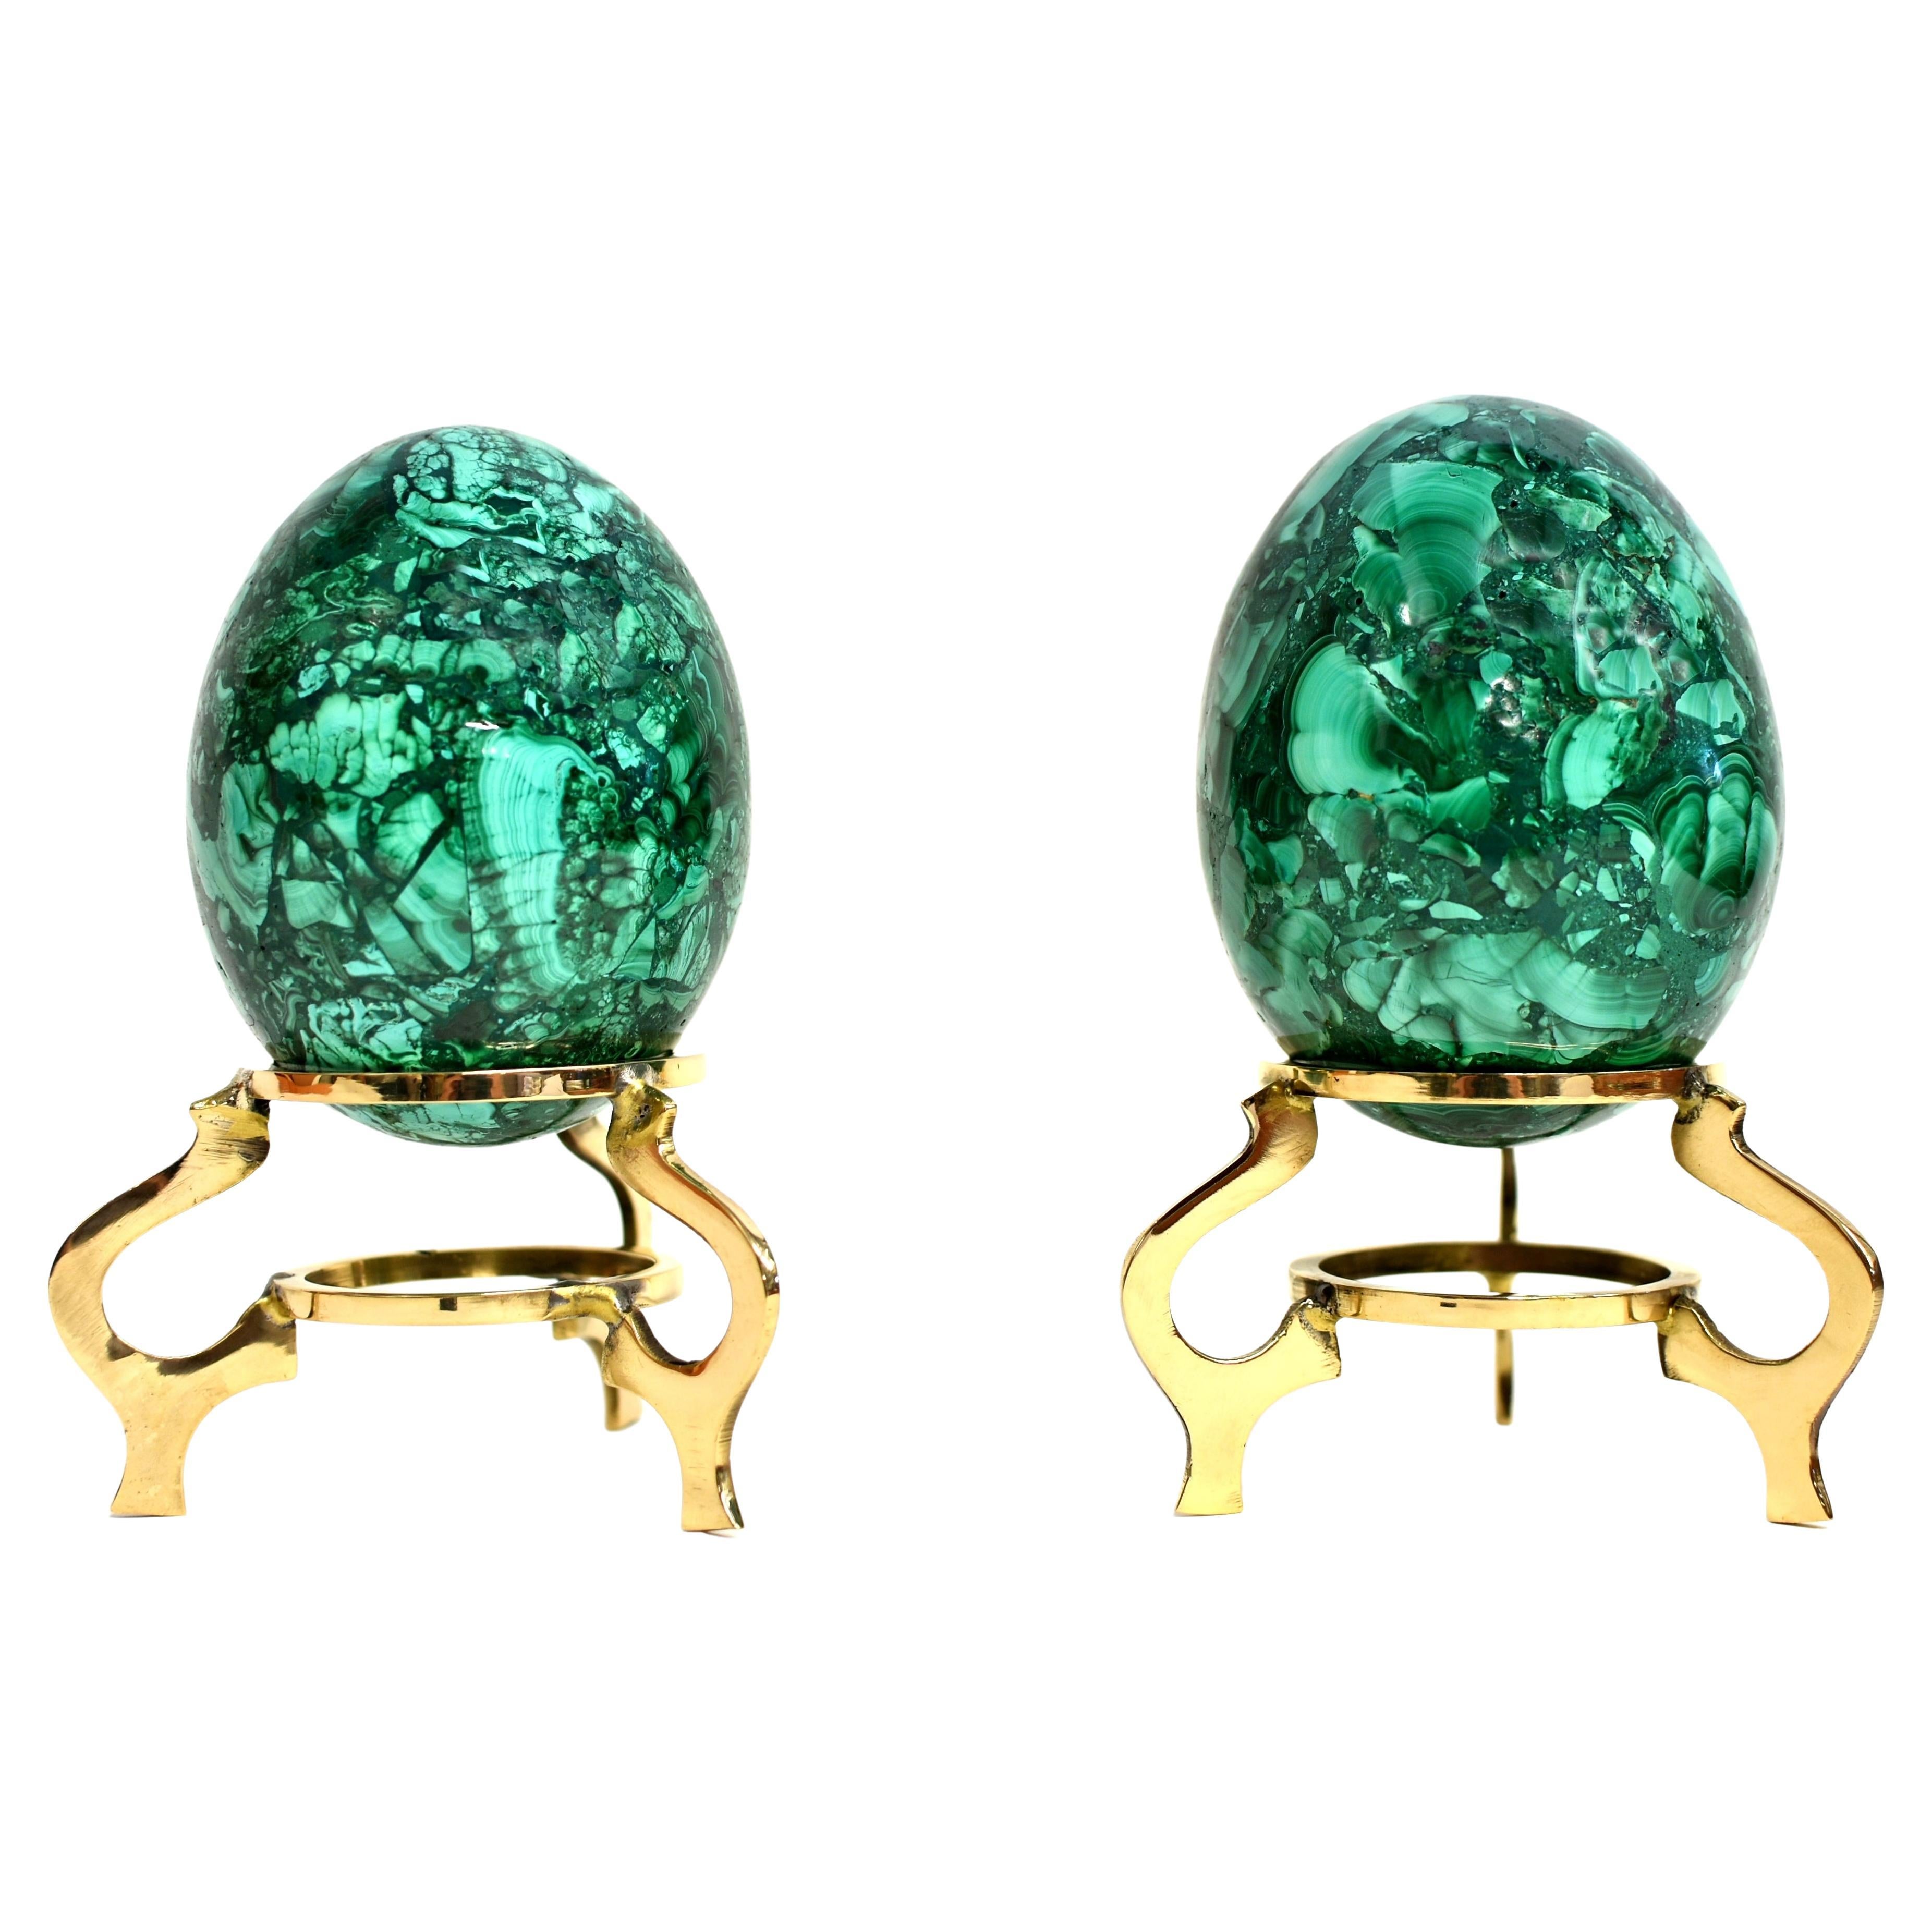 Two Large Malachite Eggs on Brass Stands